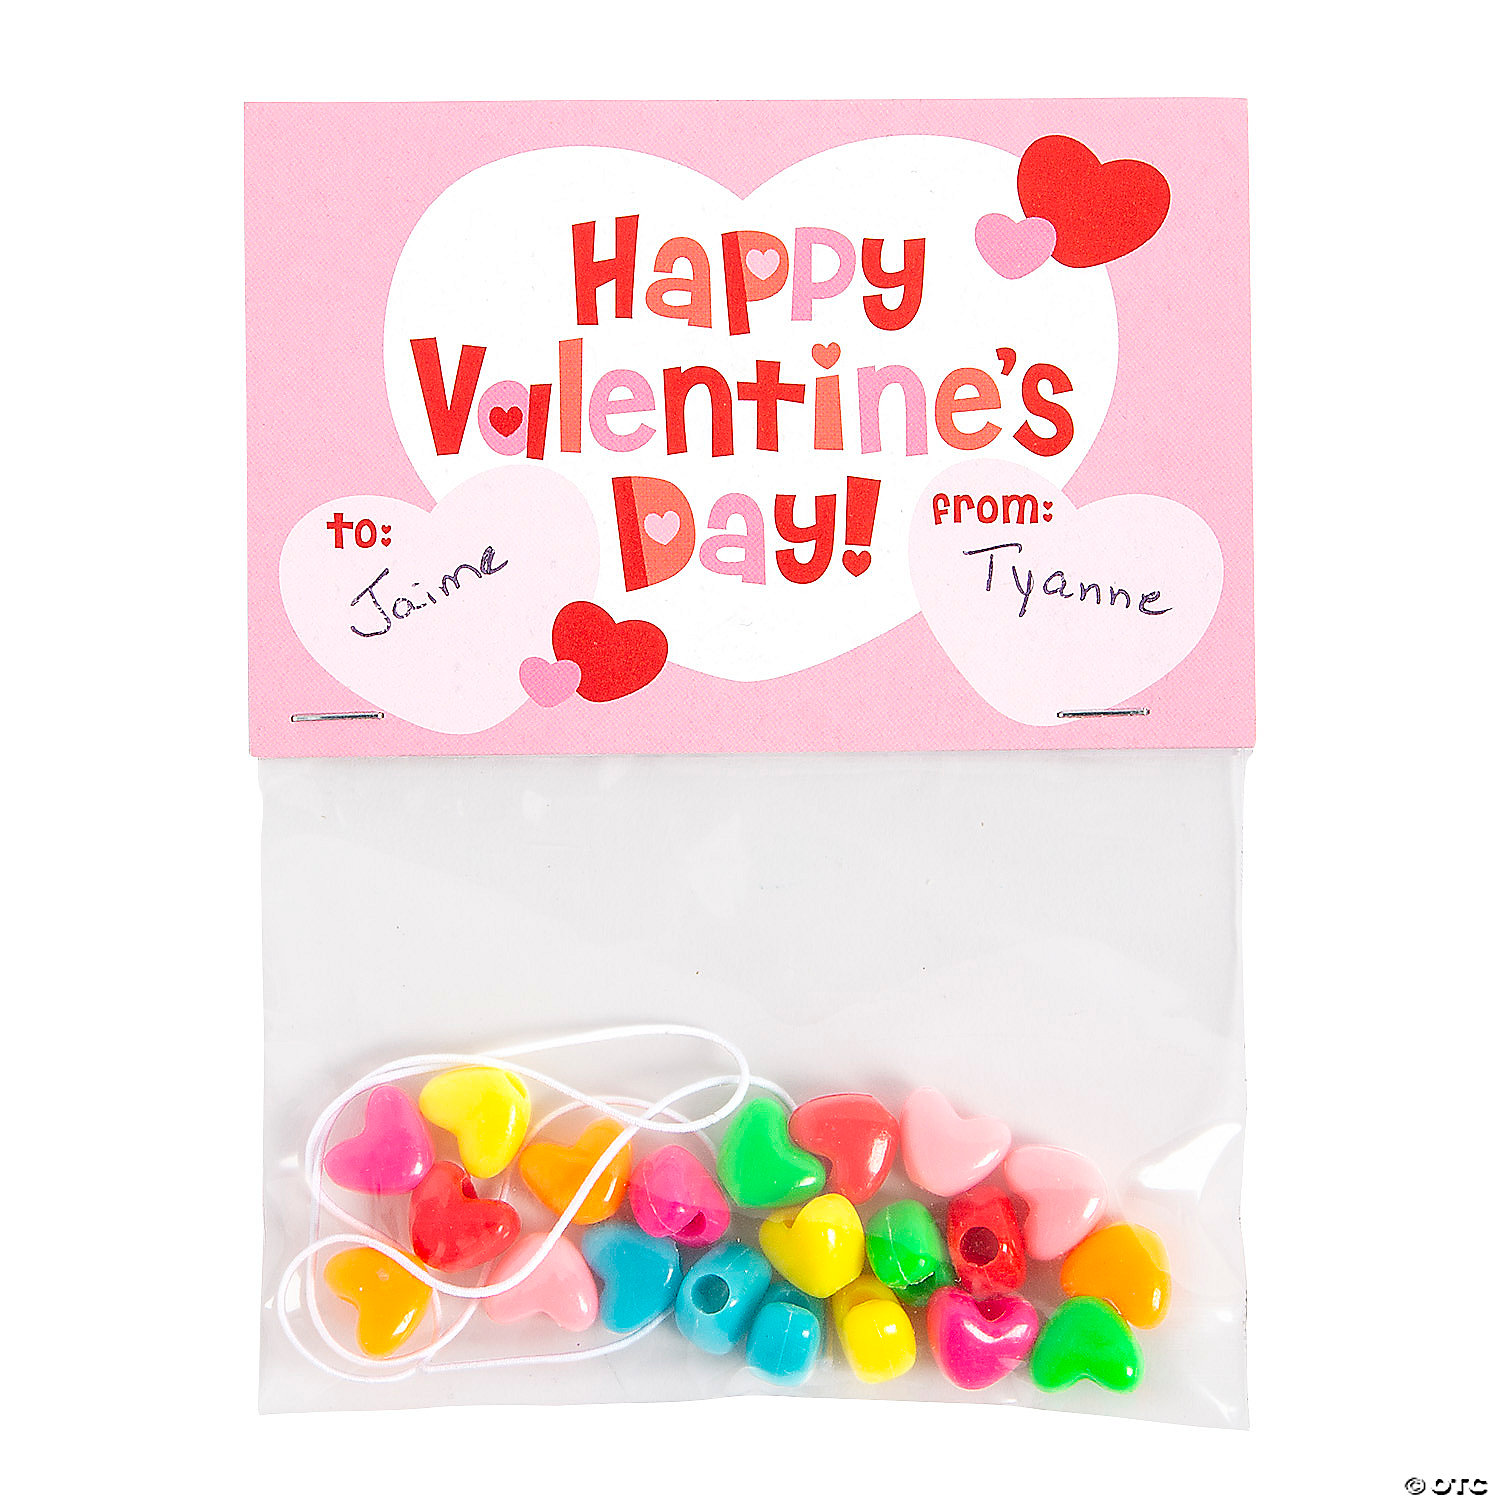 Acetate Tissue Paper Heart Craft Kit - Craft Kits - 12 Pieces